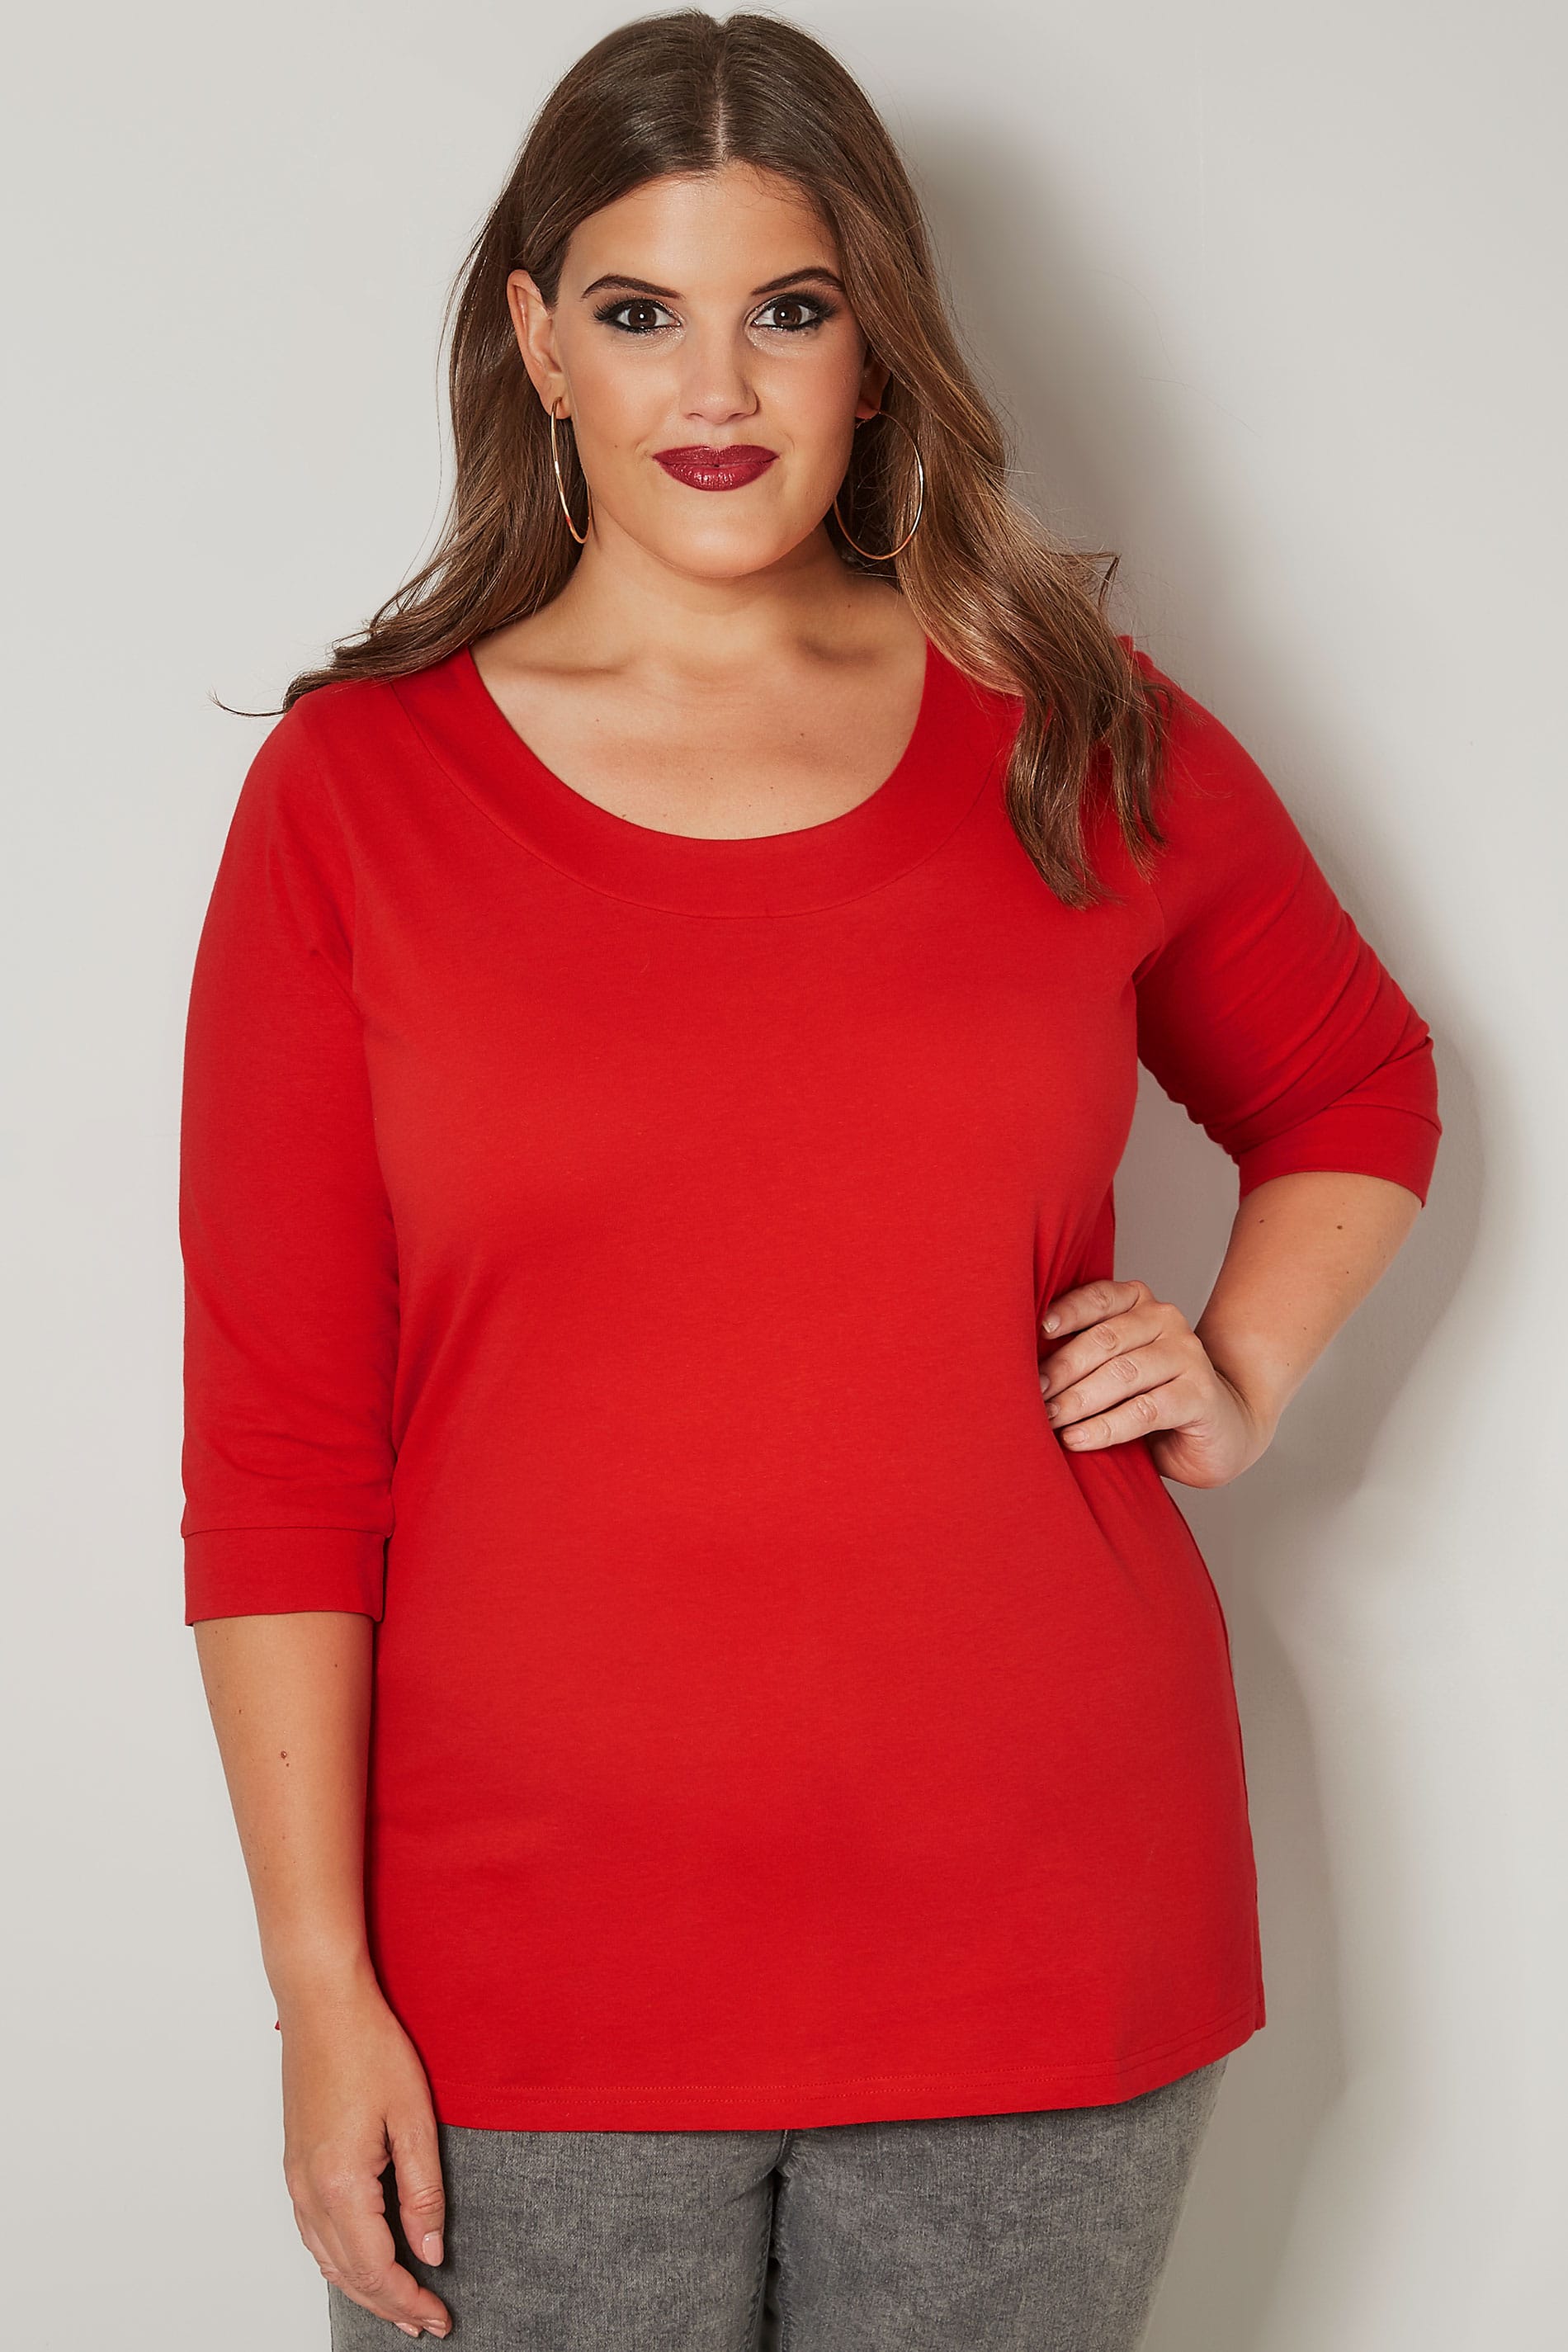 Red Seamed Scoop Neck Top, plus size 16 to 36